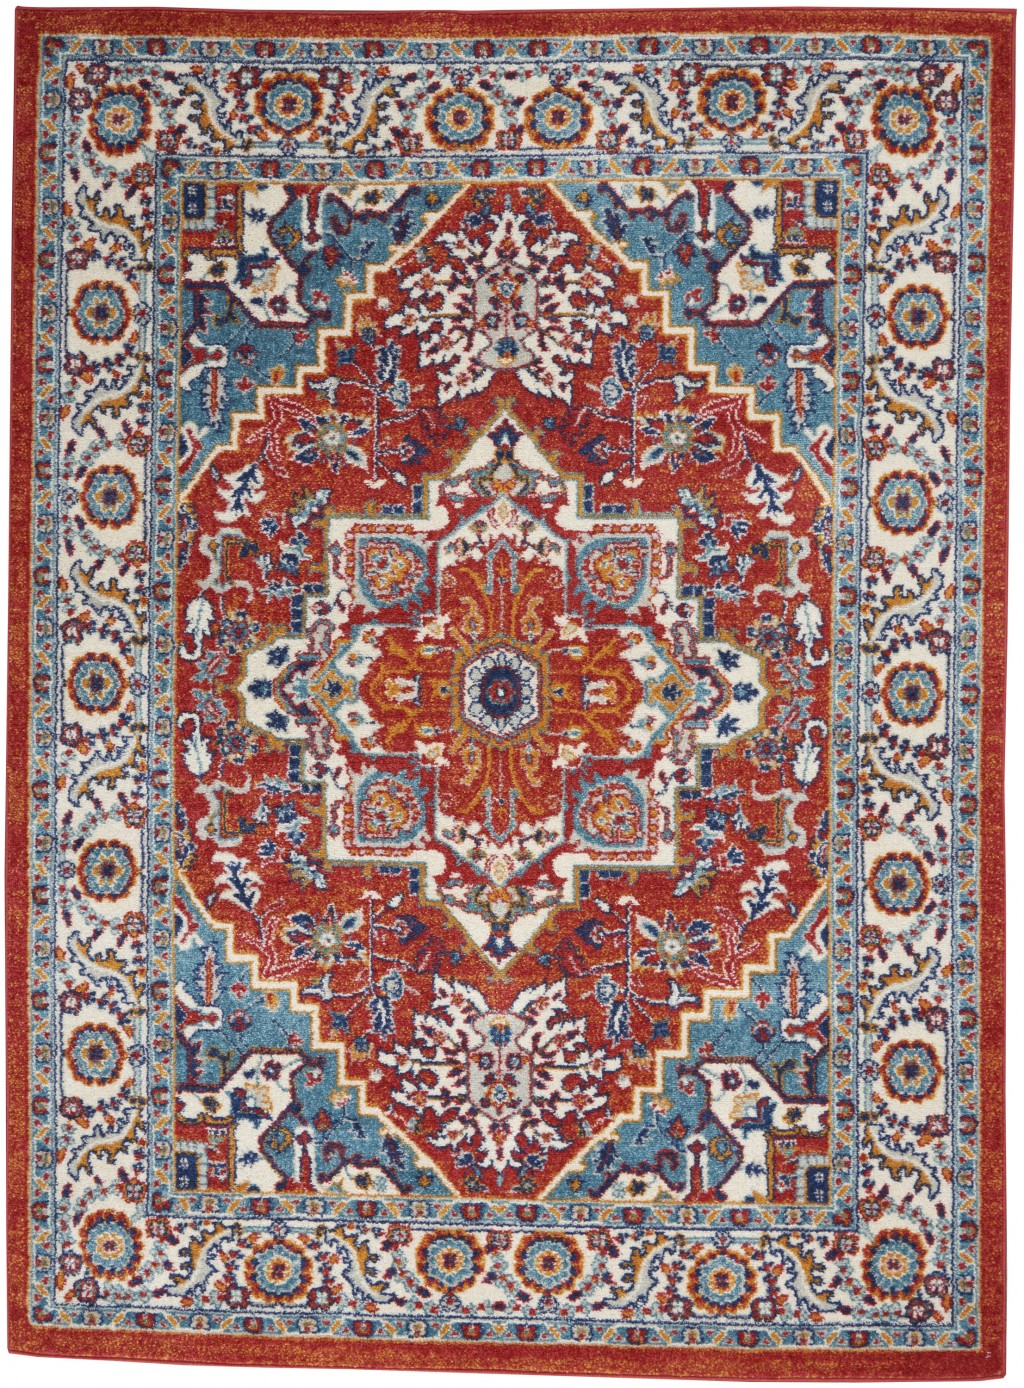 4' X 6' Red And Ivory Power Loom Area Rug-385655-1